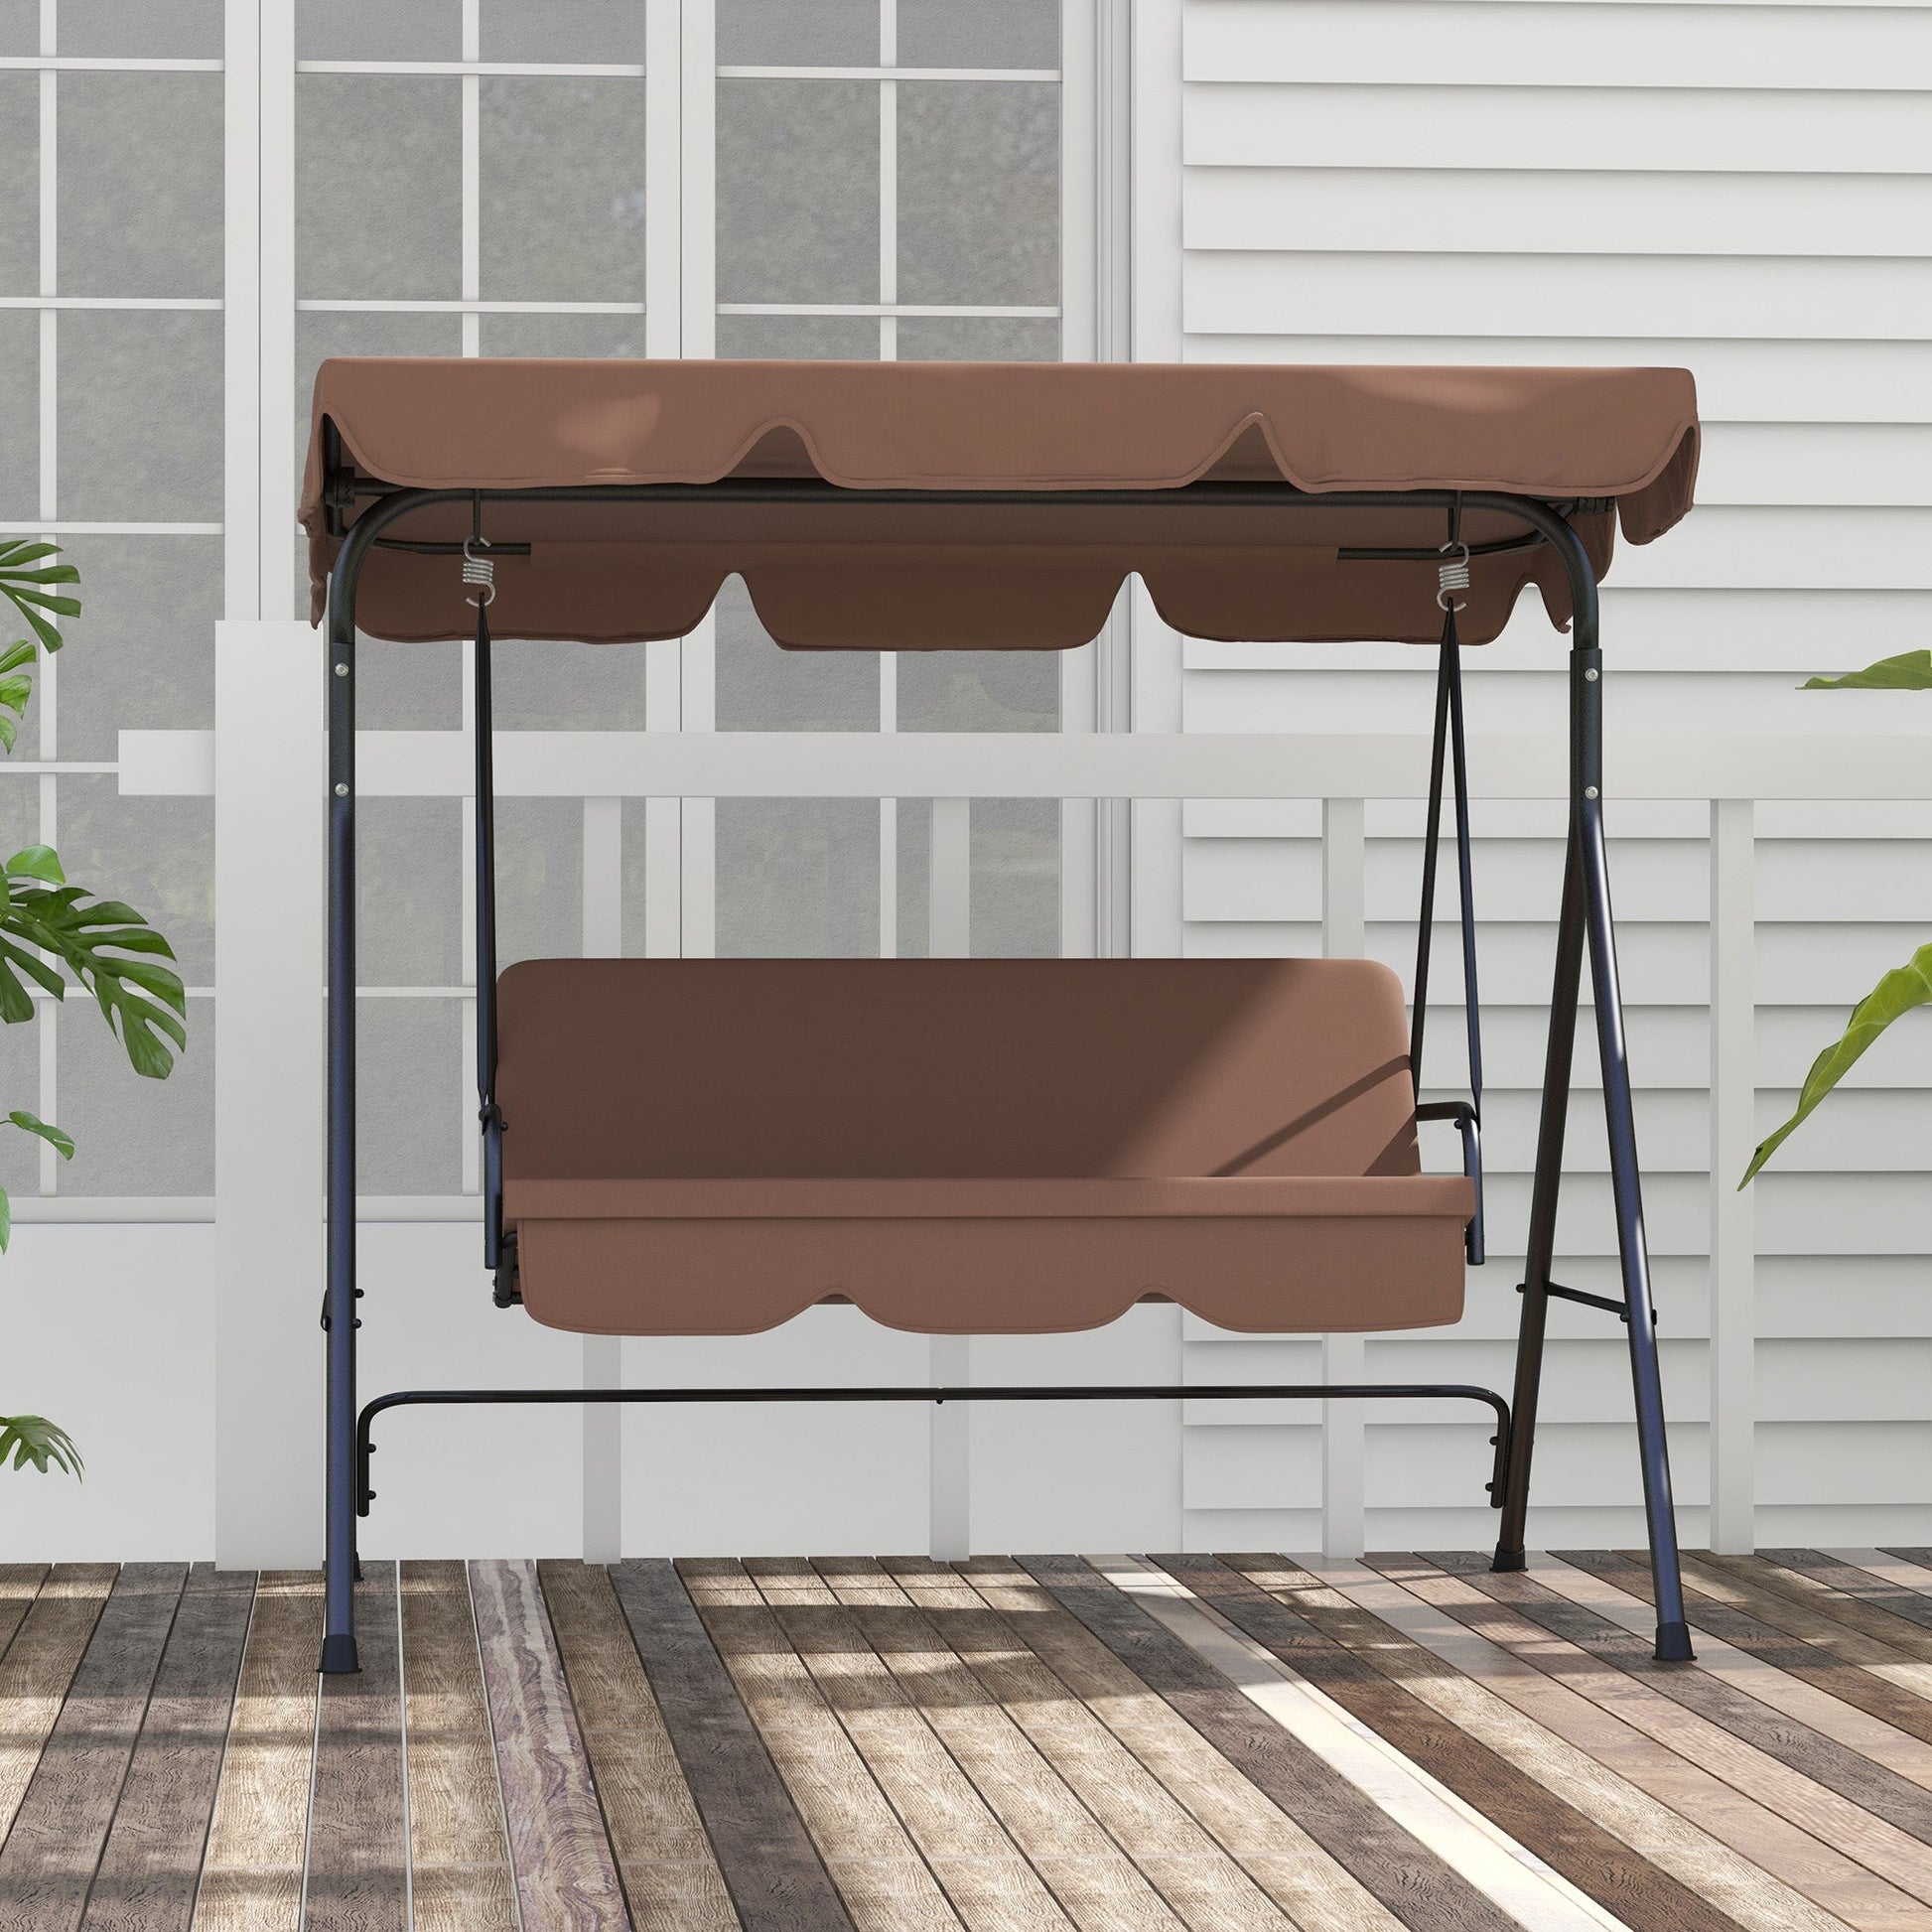 3-Seater Outdoor Porch Swing with Adjustable Canopy, Patio Swing Chair for Garden, Poolside, Backyard, Brown at Gallery Canada